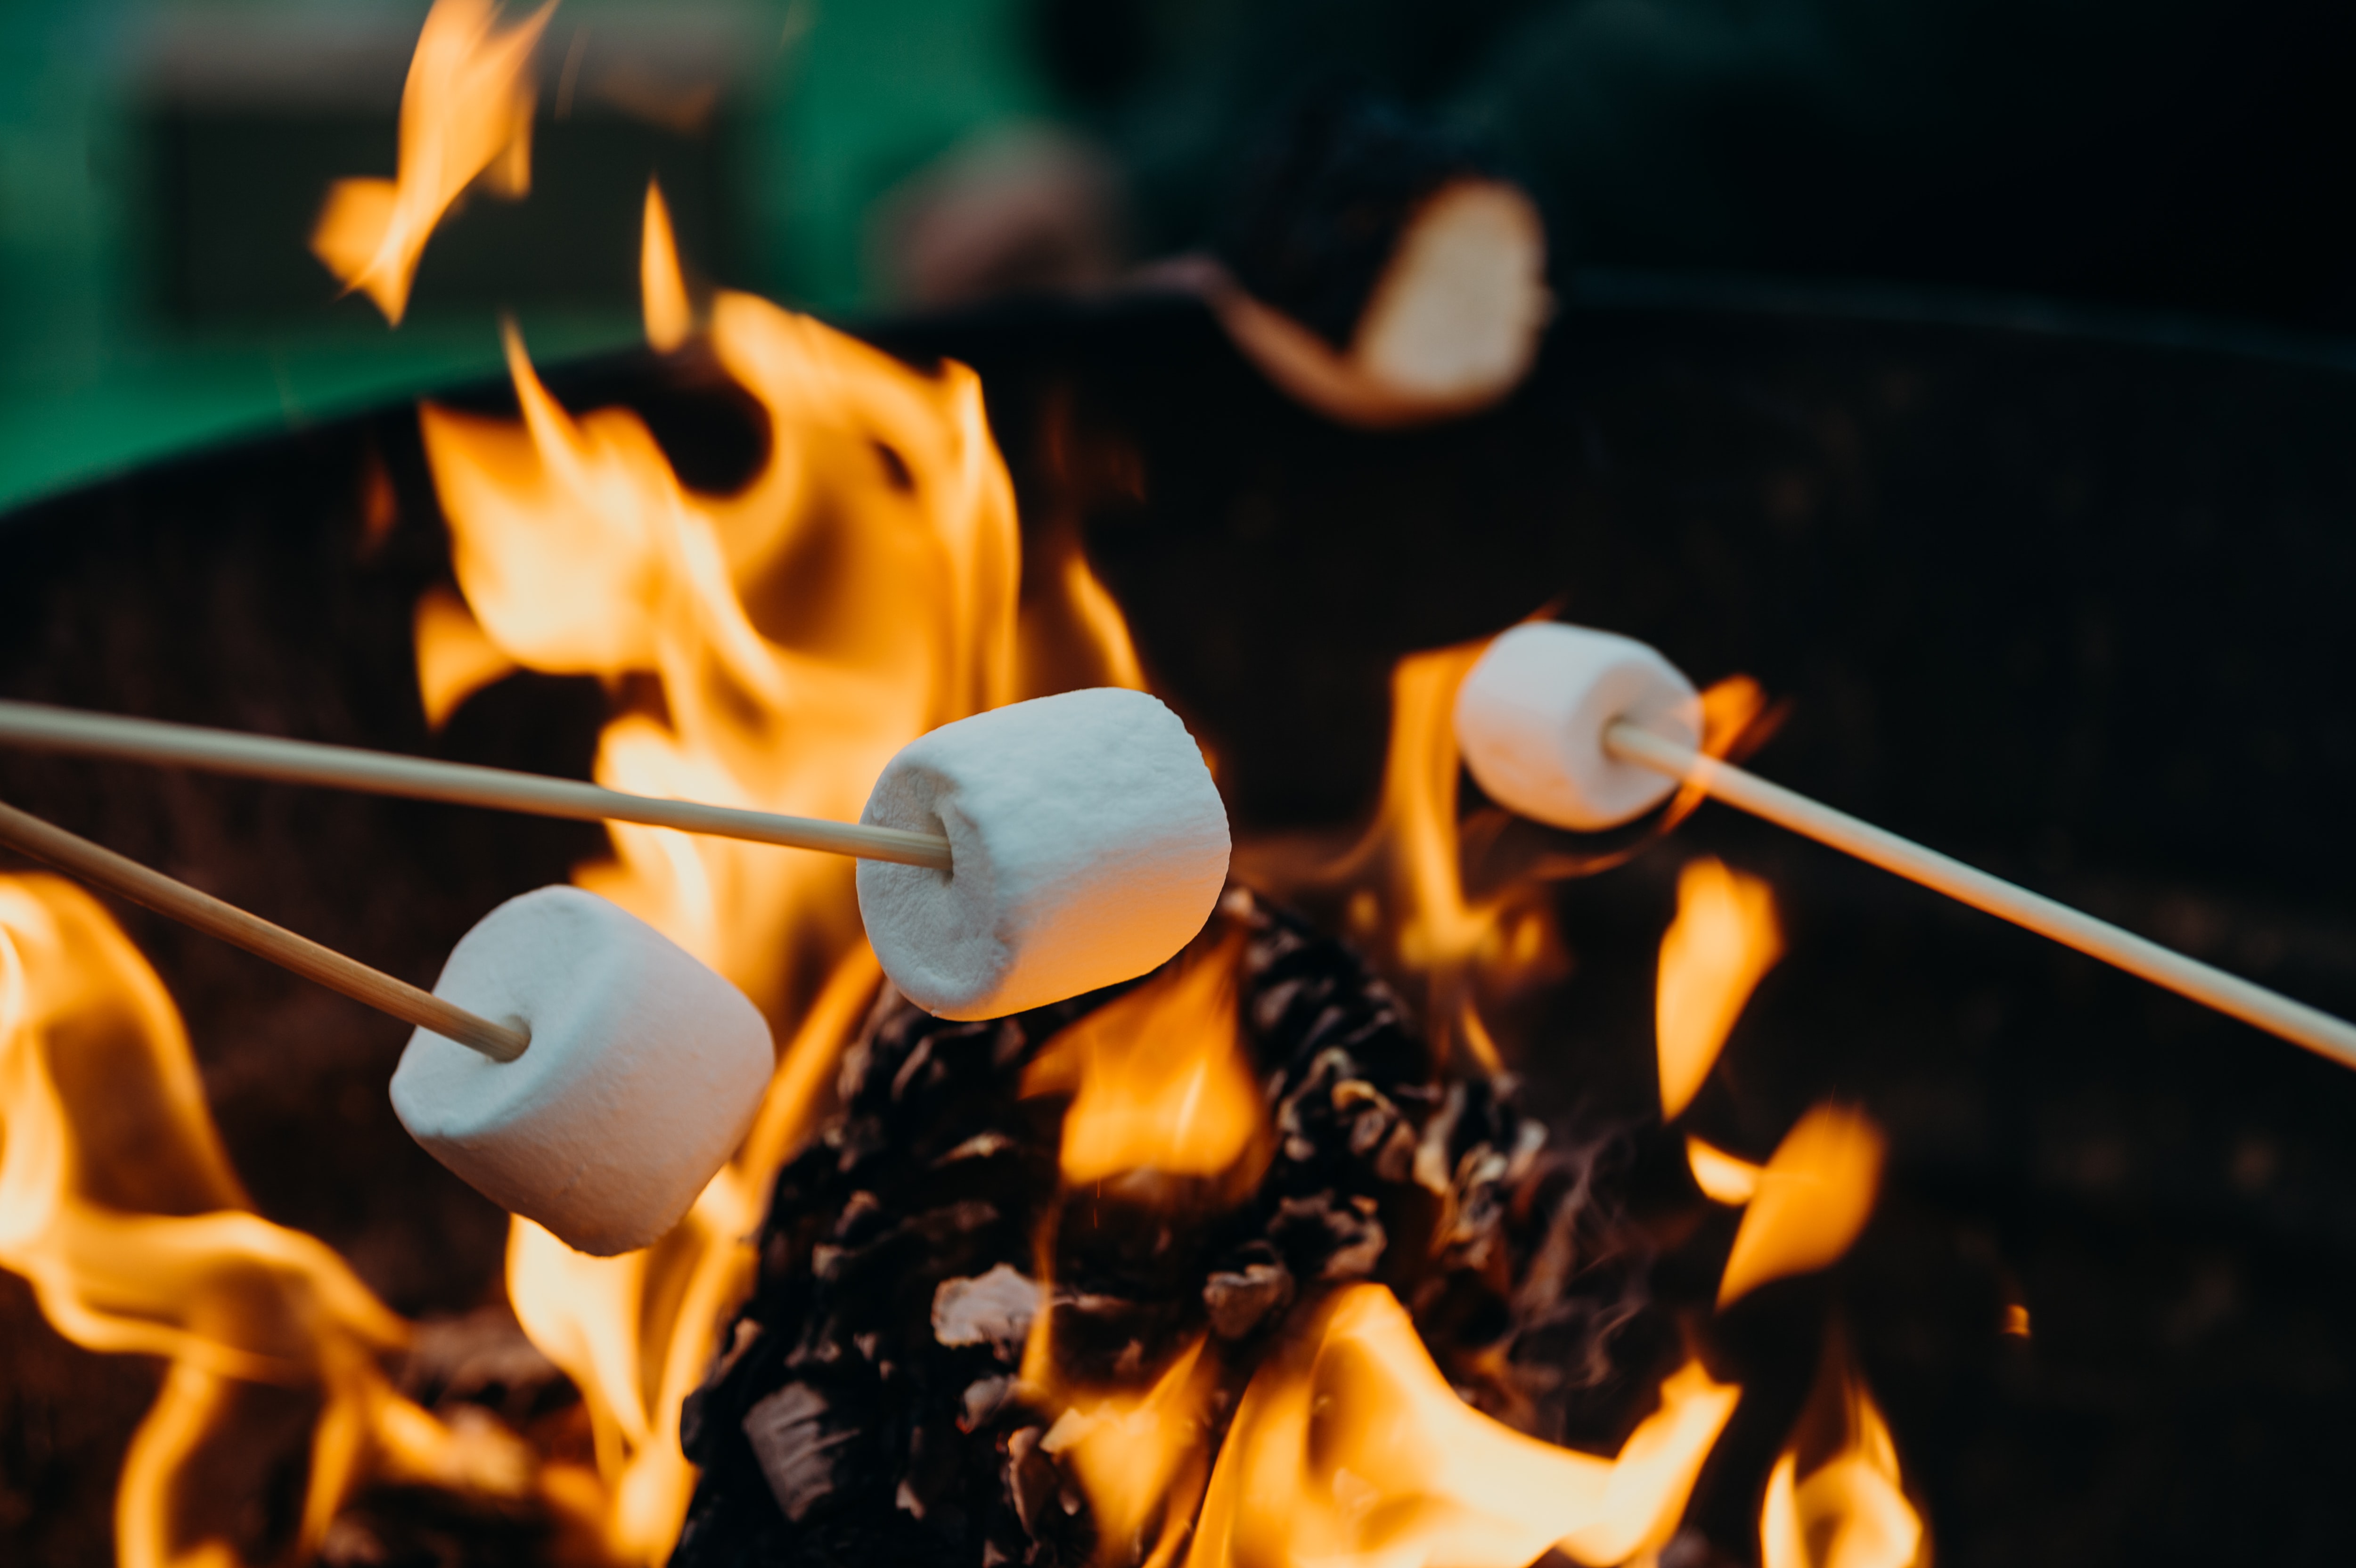 an image of toasting marshmallows to represent bulk herbs and spices on bonfire night.